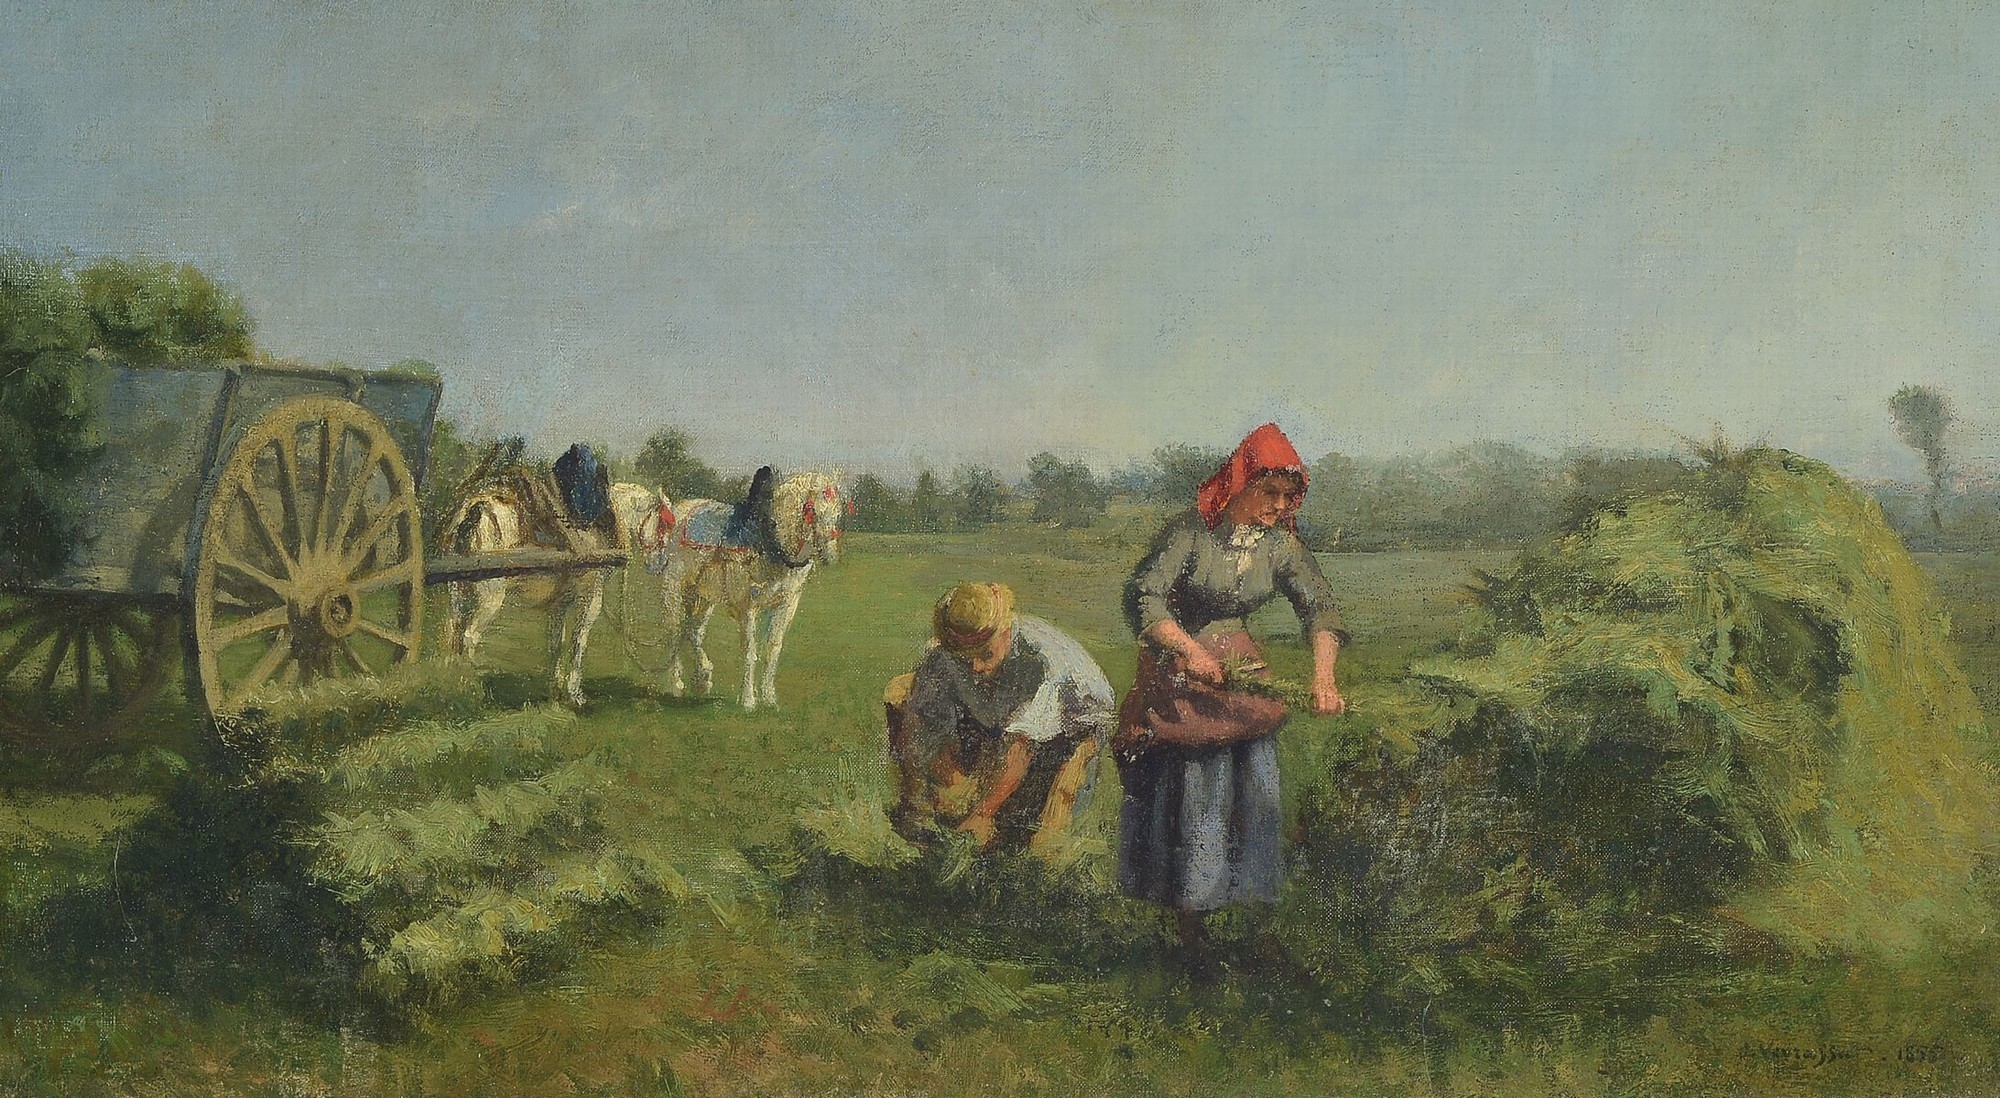 hay harvest with cart, two white horses, and two persons by Jules Jacques Veyrassat, 1855